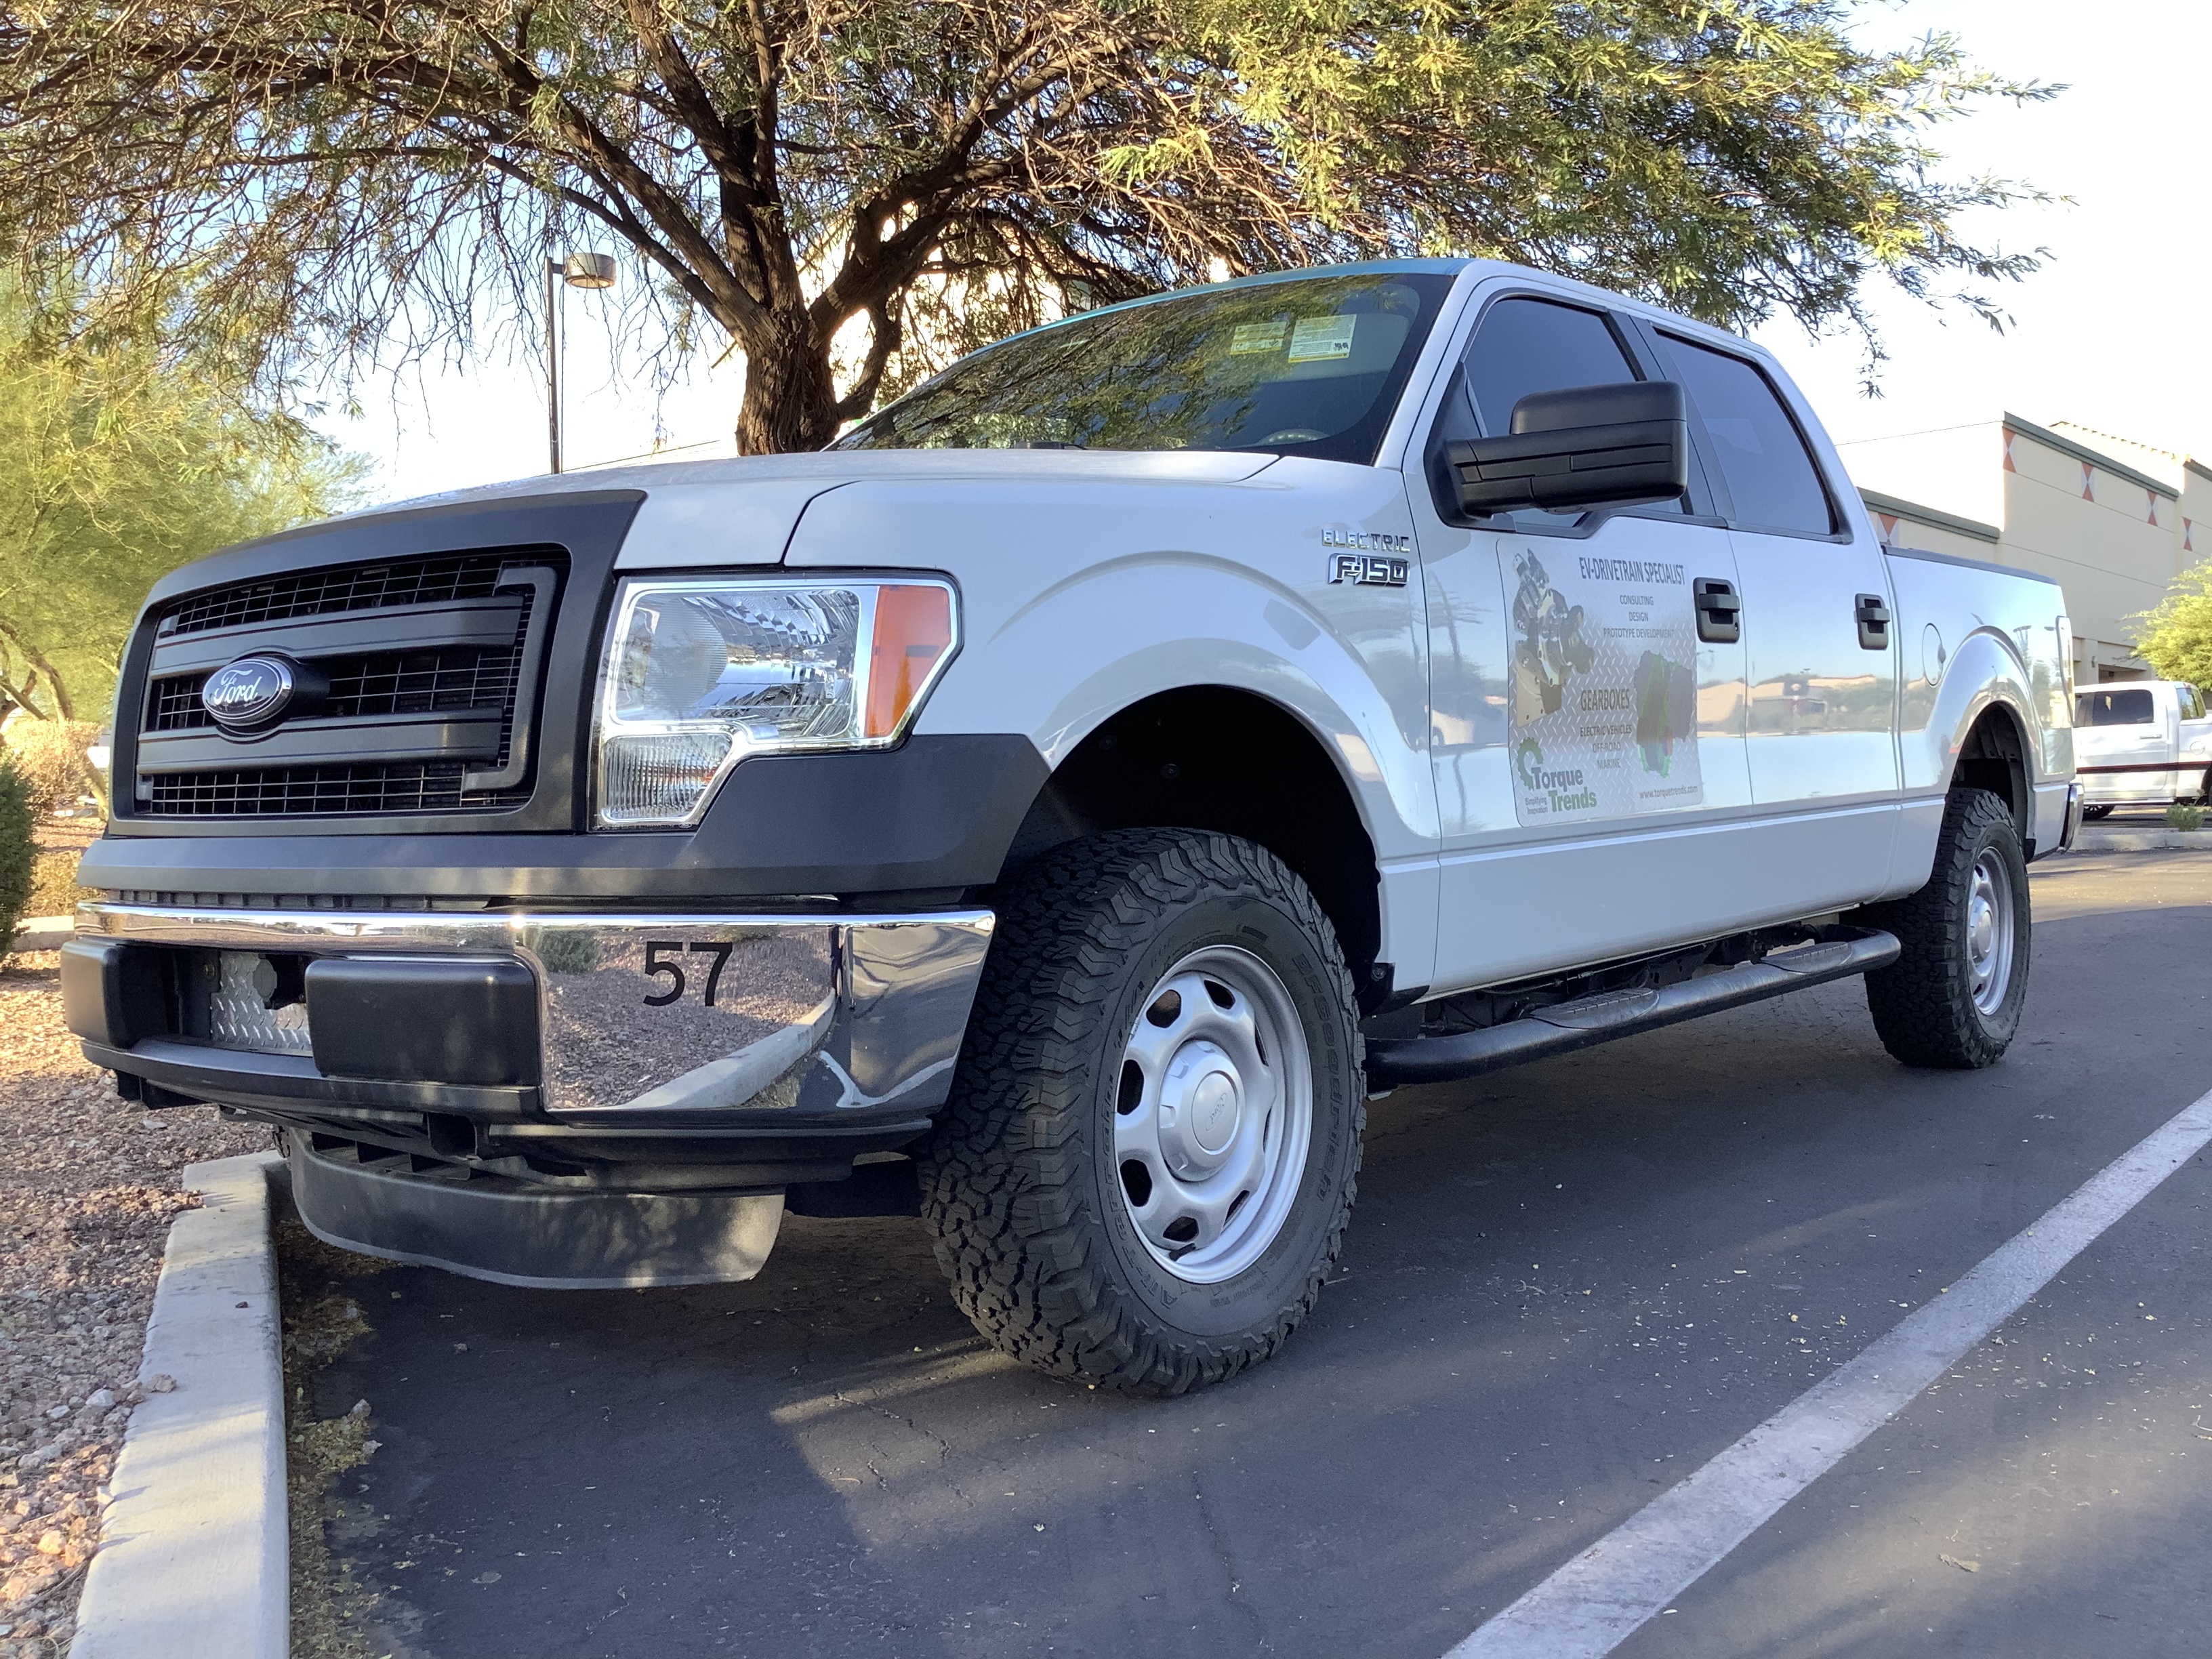 Mitchell Yow's fully electric Ford F-150